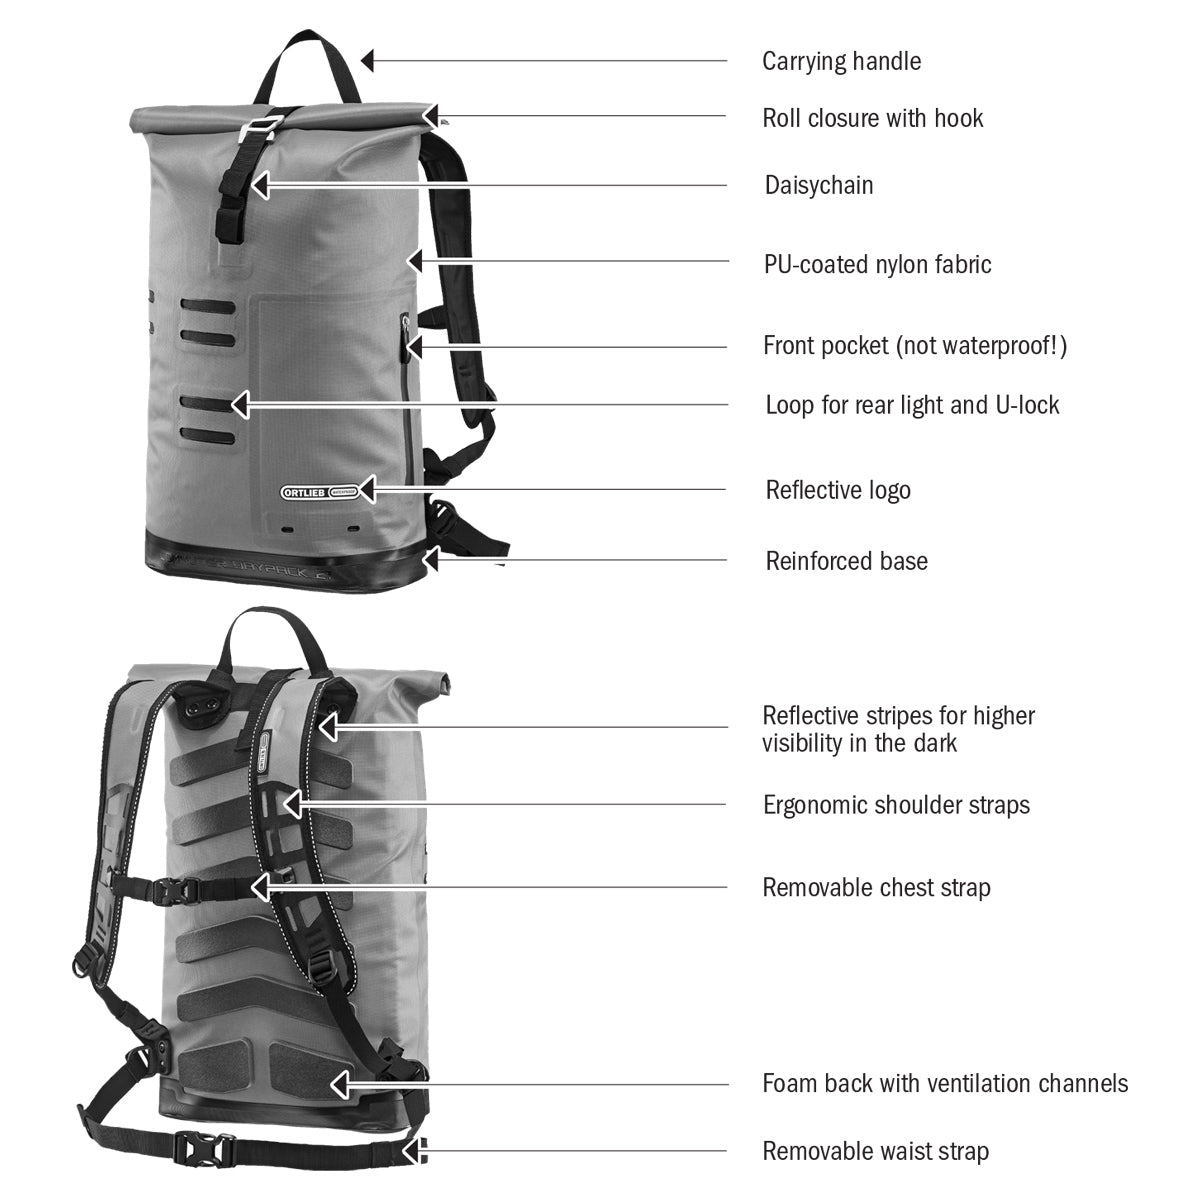 Ortlieb Commuter Daypack City Features Overview